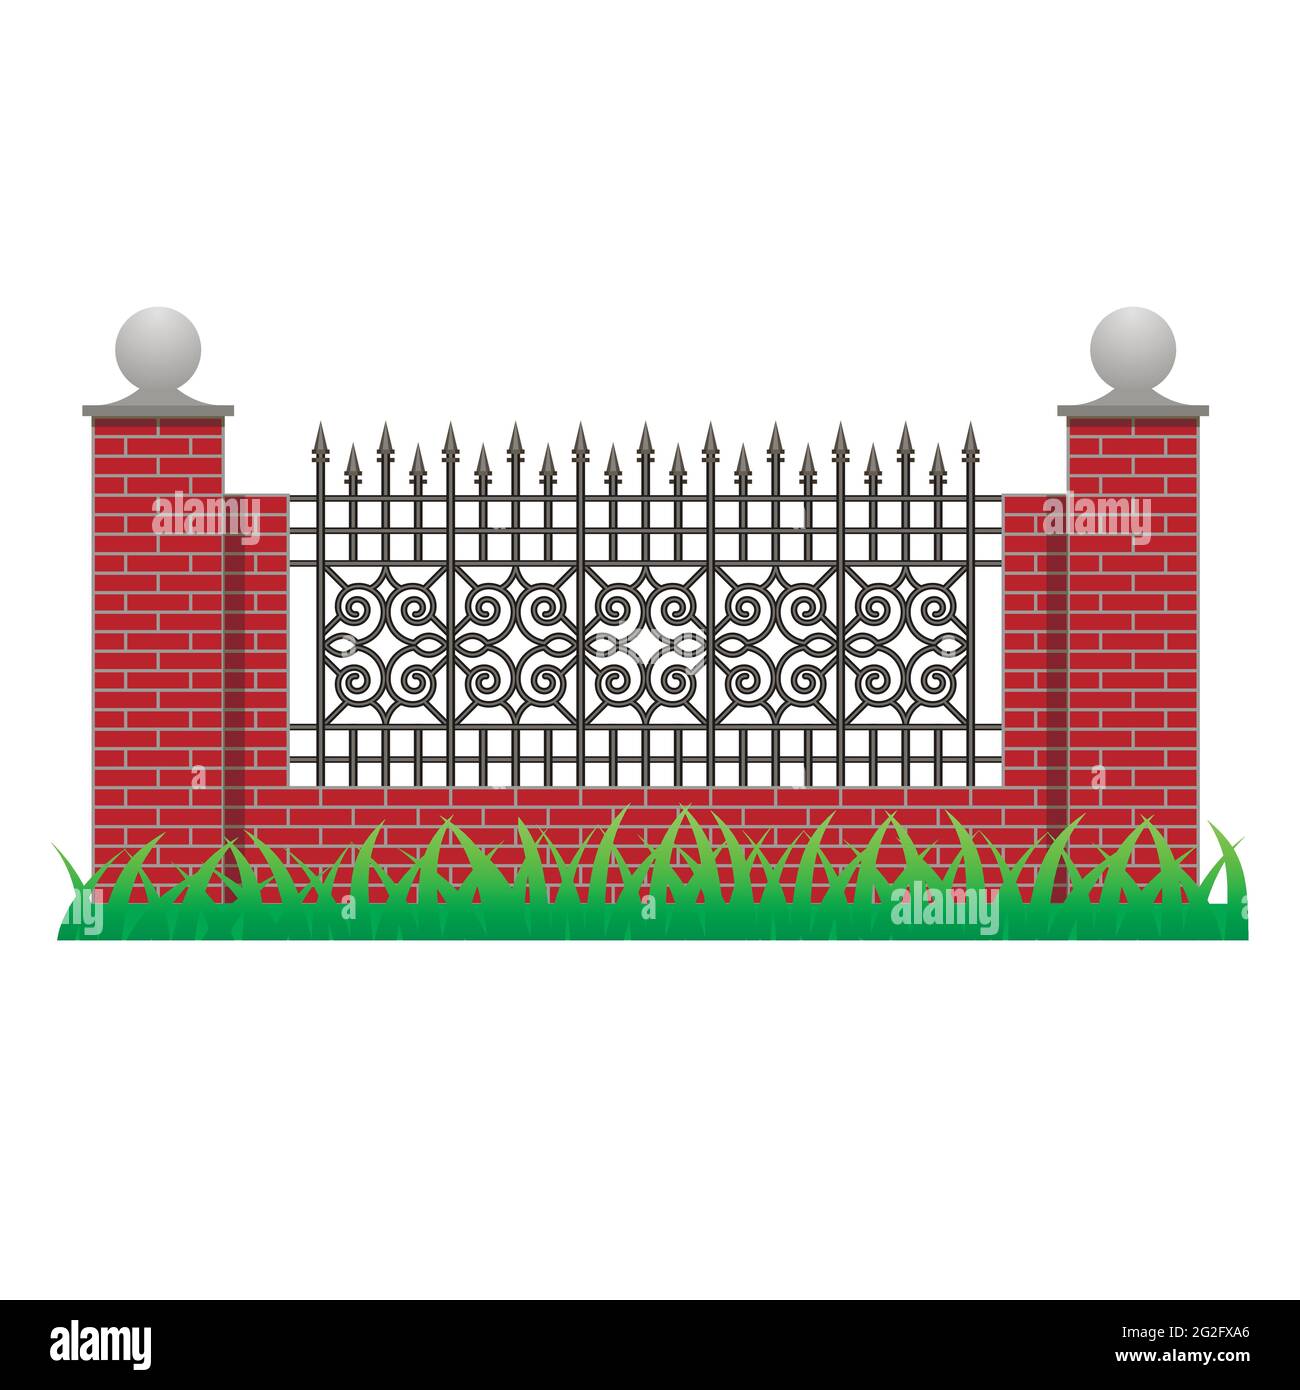 Brick fence with pillars and decorative grille. Element to use in manor, house or garden fence. Isolated object on white background. Vector illustrati Stock Vector